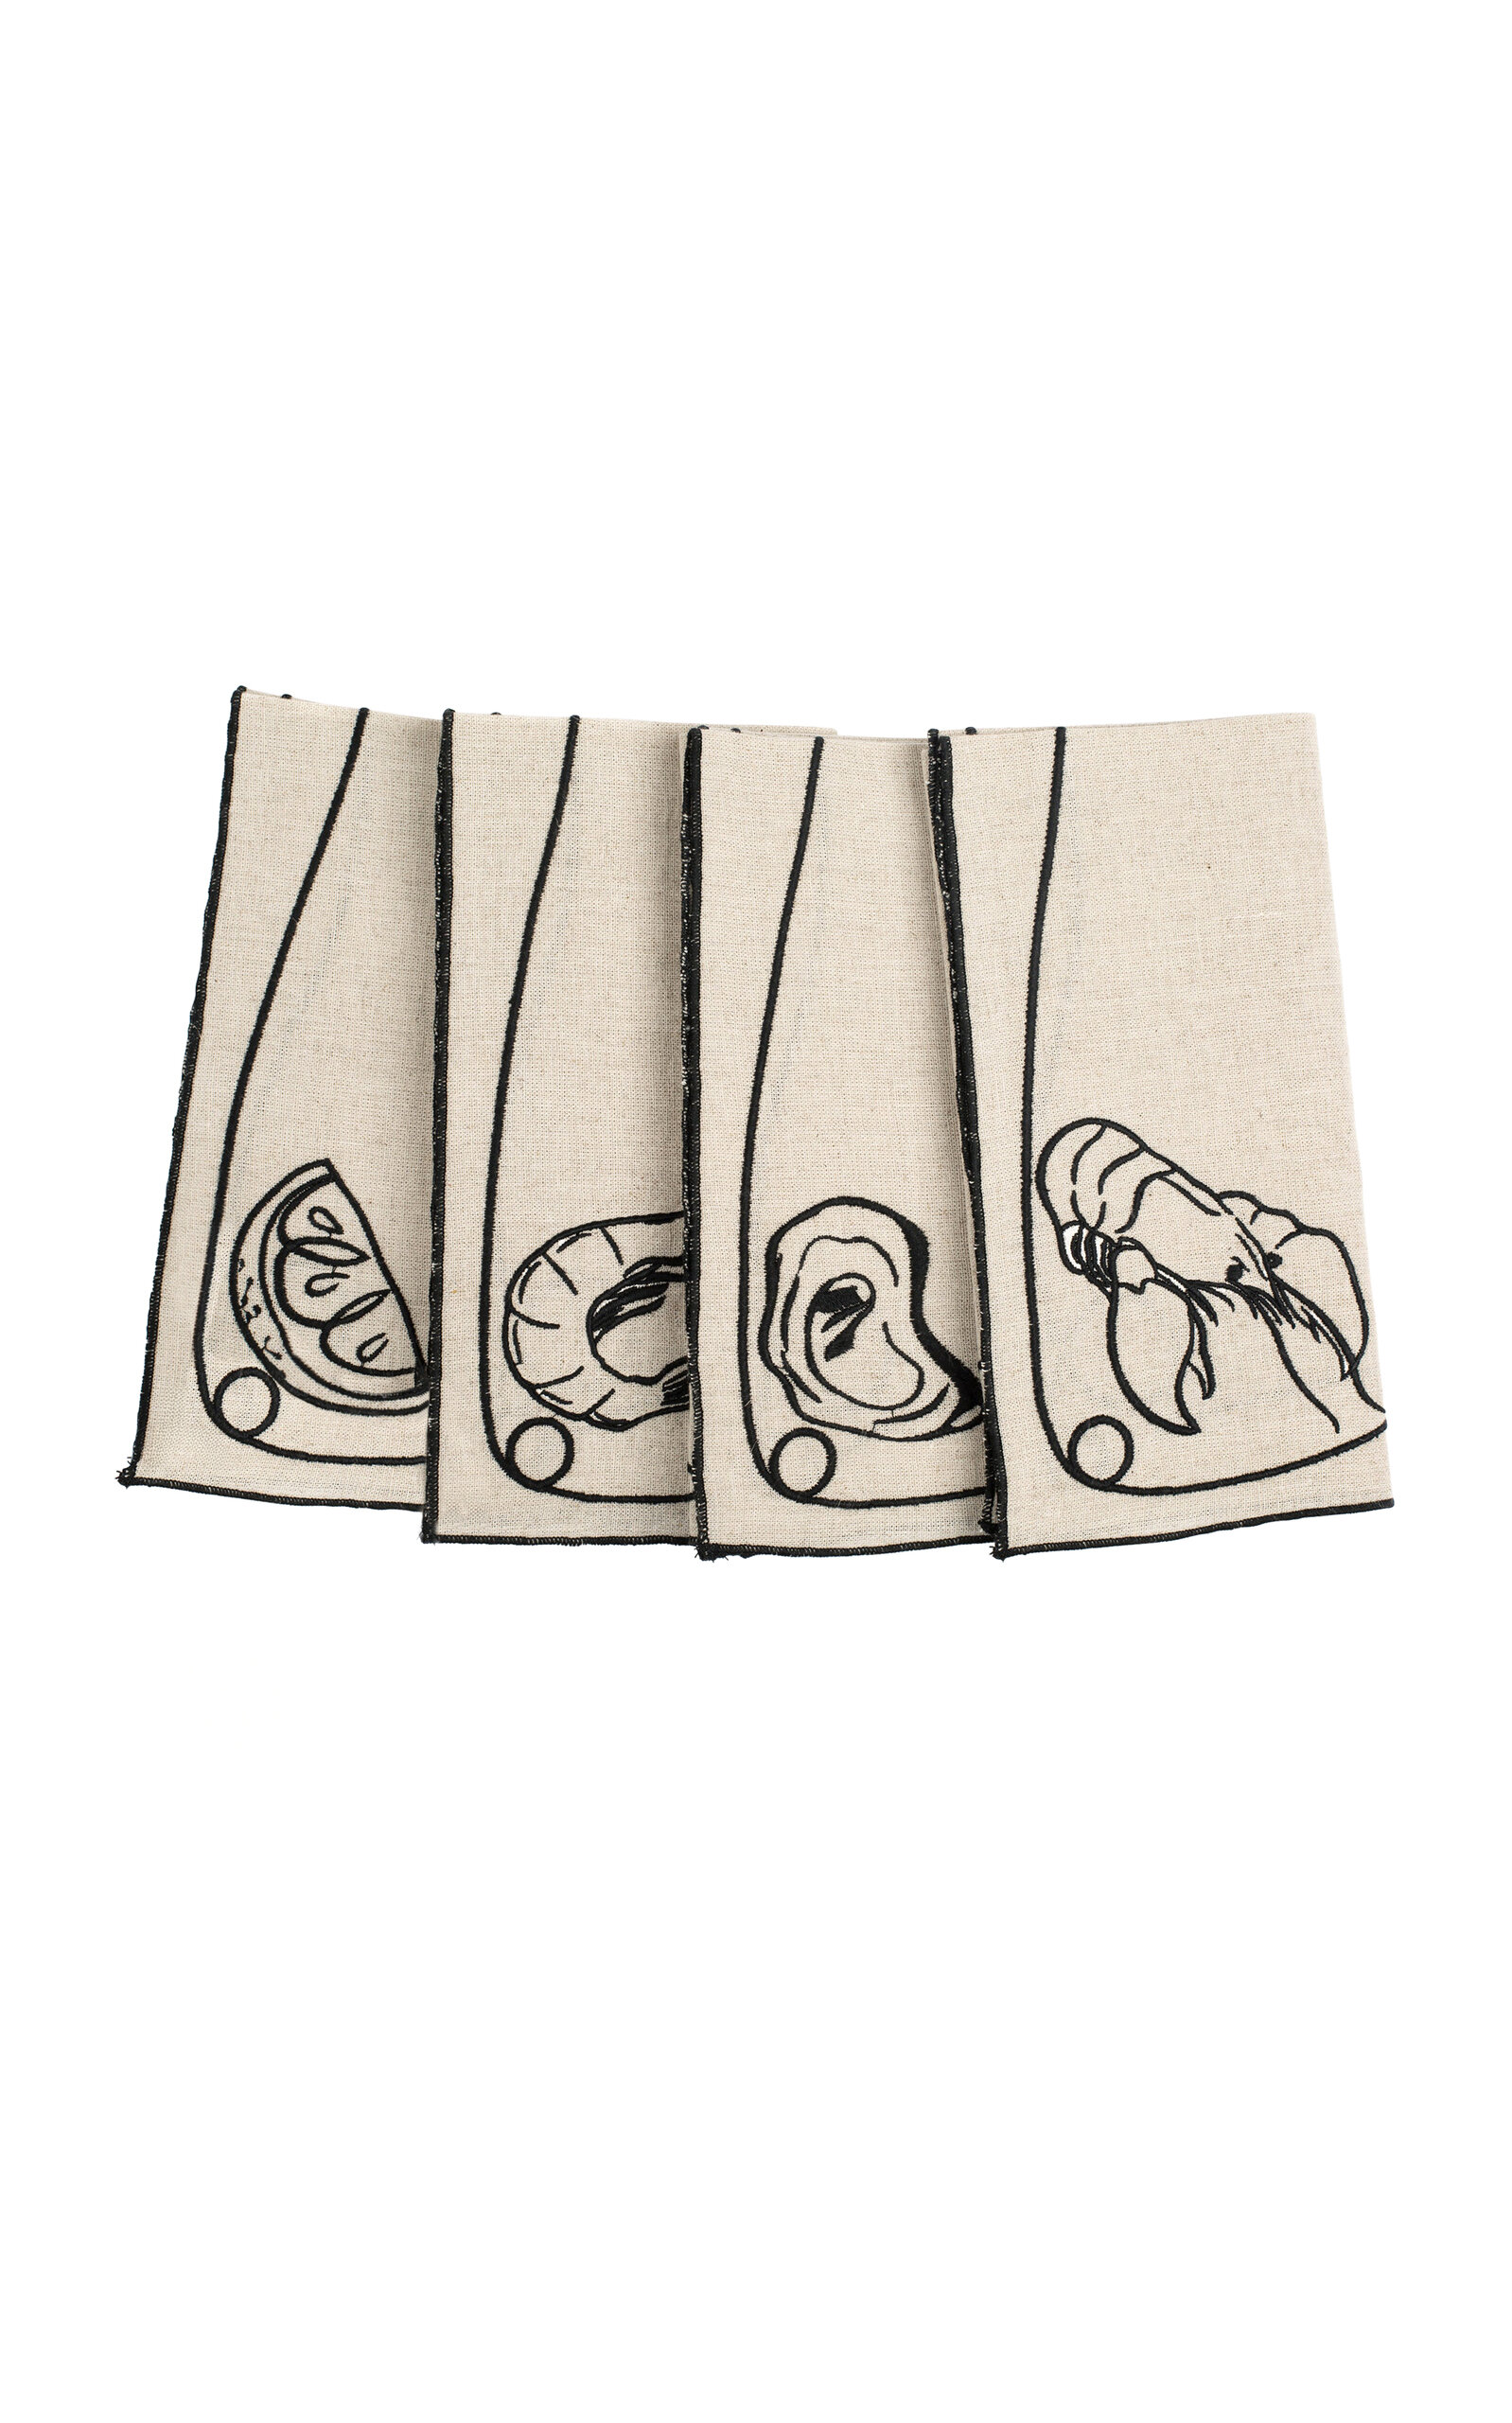 Misette Set-of-four Line Drawing Embroidered Linen Napkins In Neutral